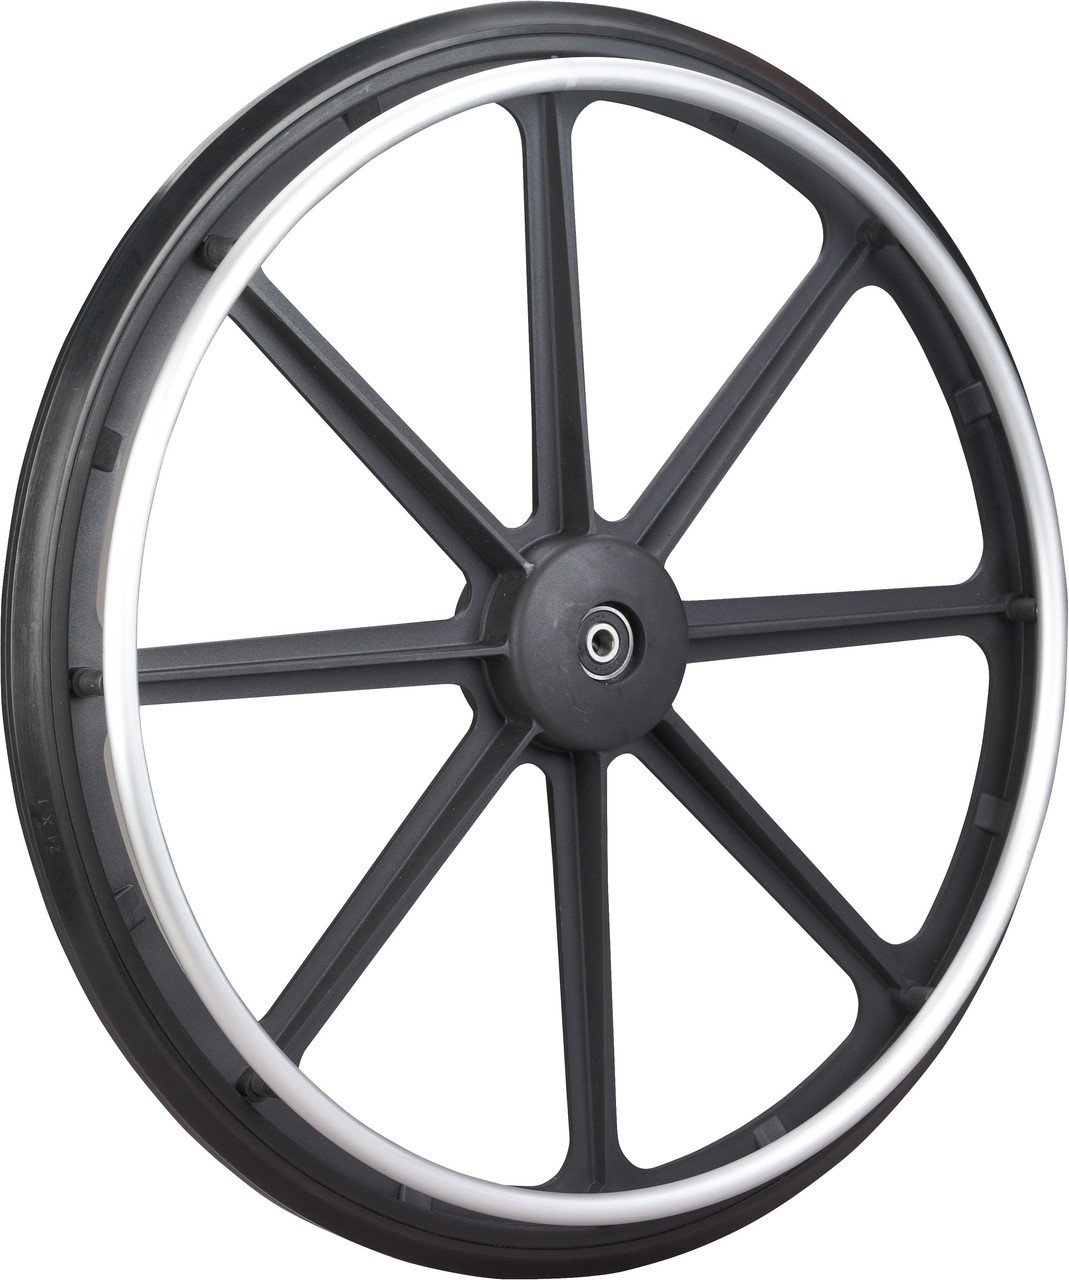 STDS1001 Standard 24" x 1" Wheel for Drive Wheelchairs. Sols as each.